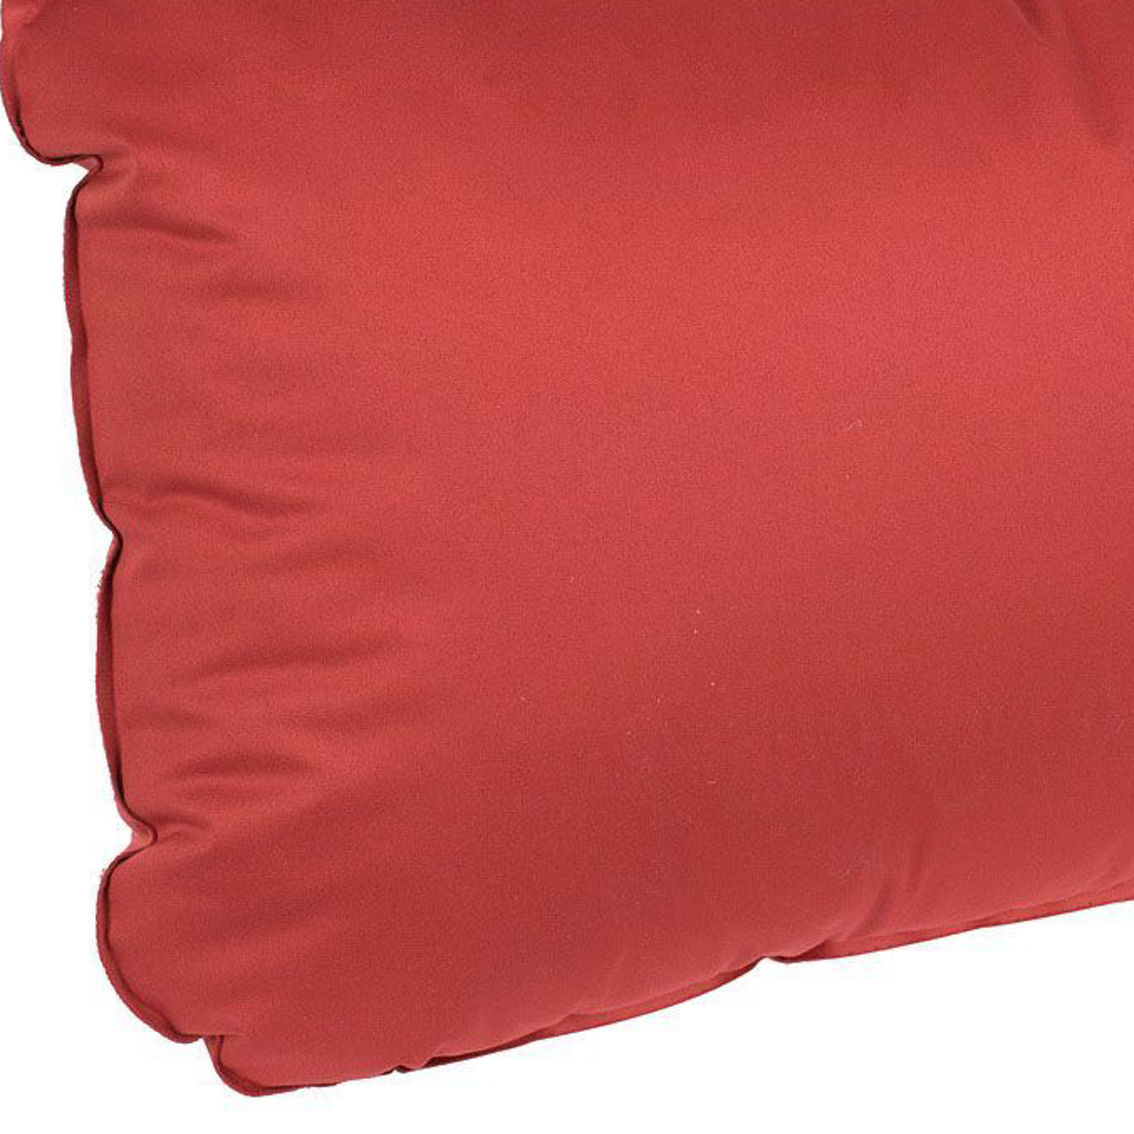 PEREGRINE PRO STRETCH PILLOW L - Image 2 of 2